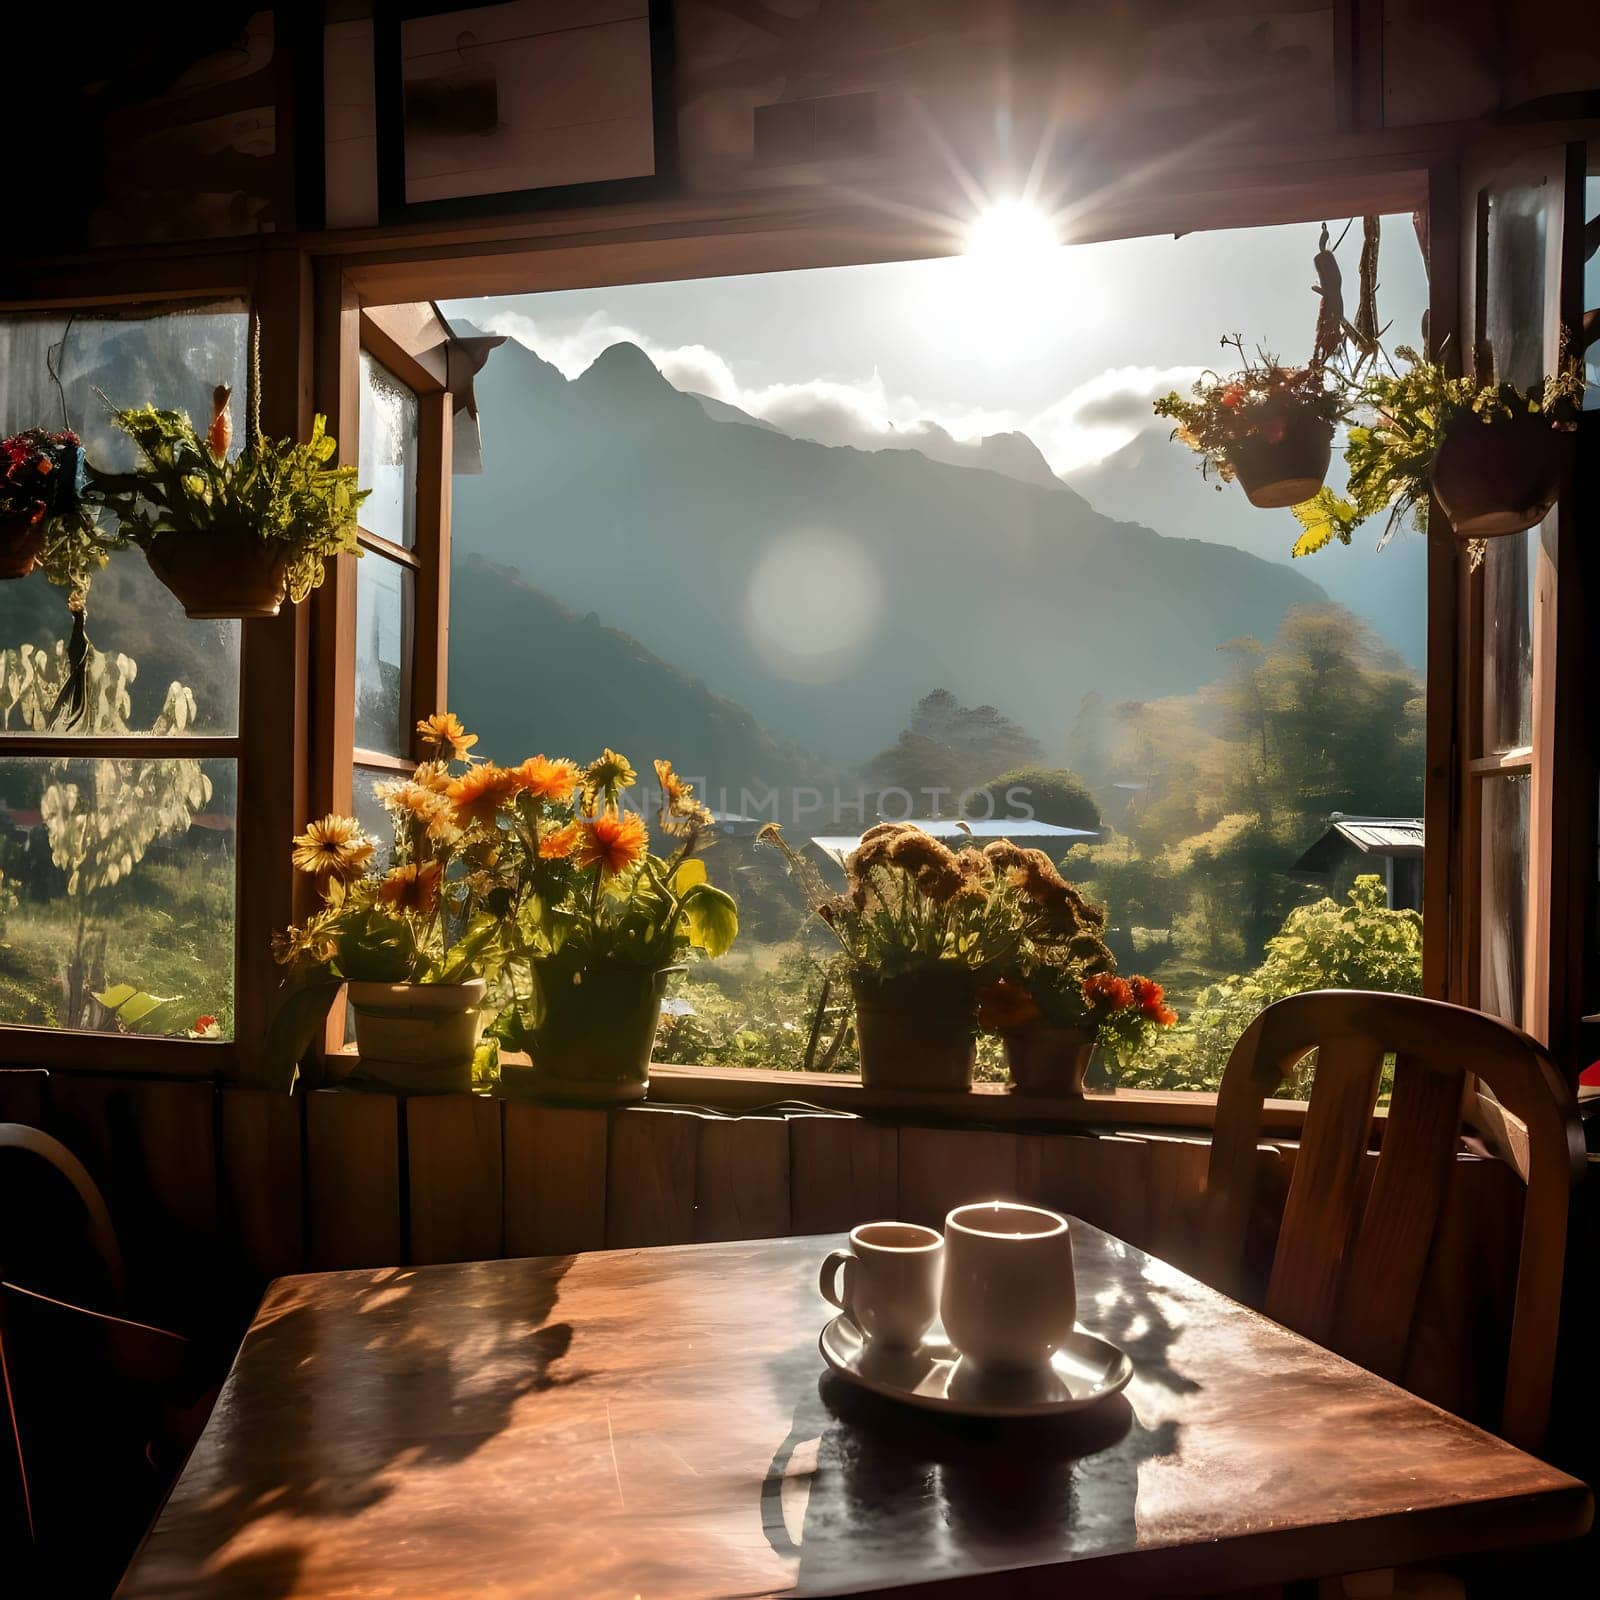 A table displays elegantly arranged dishes against a backdrop of majestic mountain ranges visible through the window, creating a stunning dining experience.